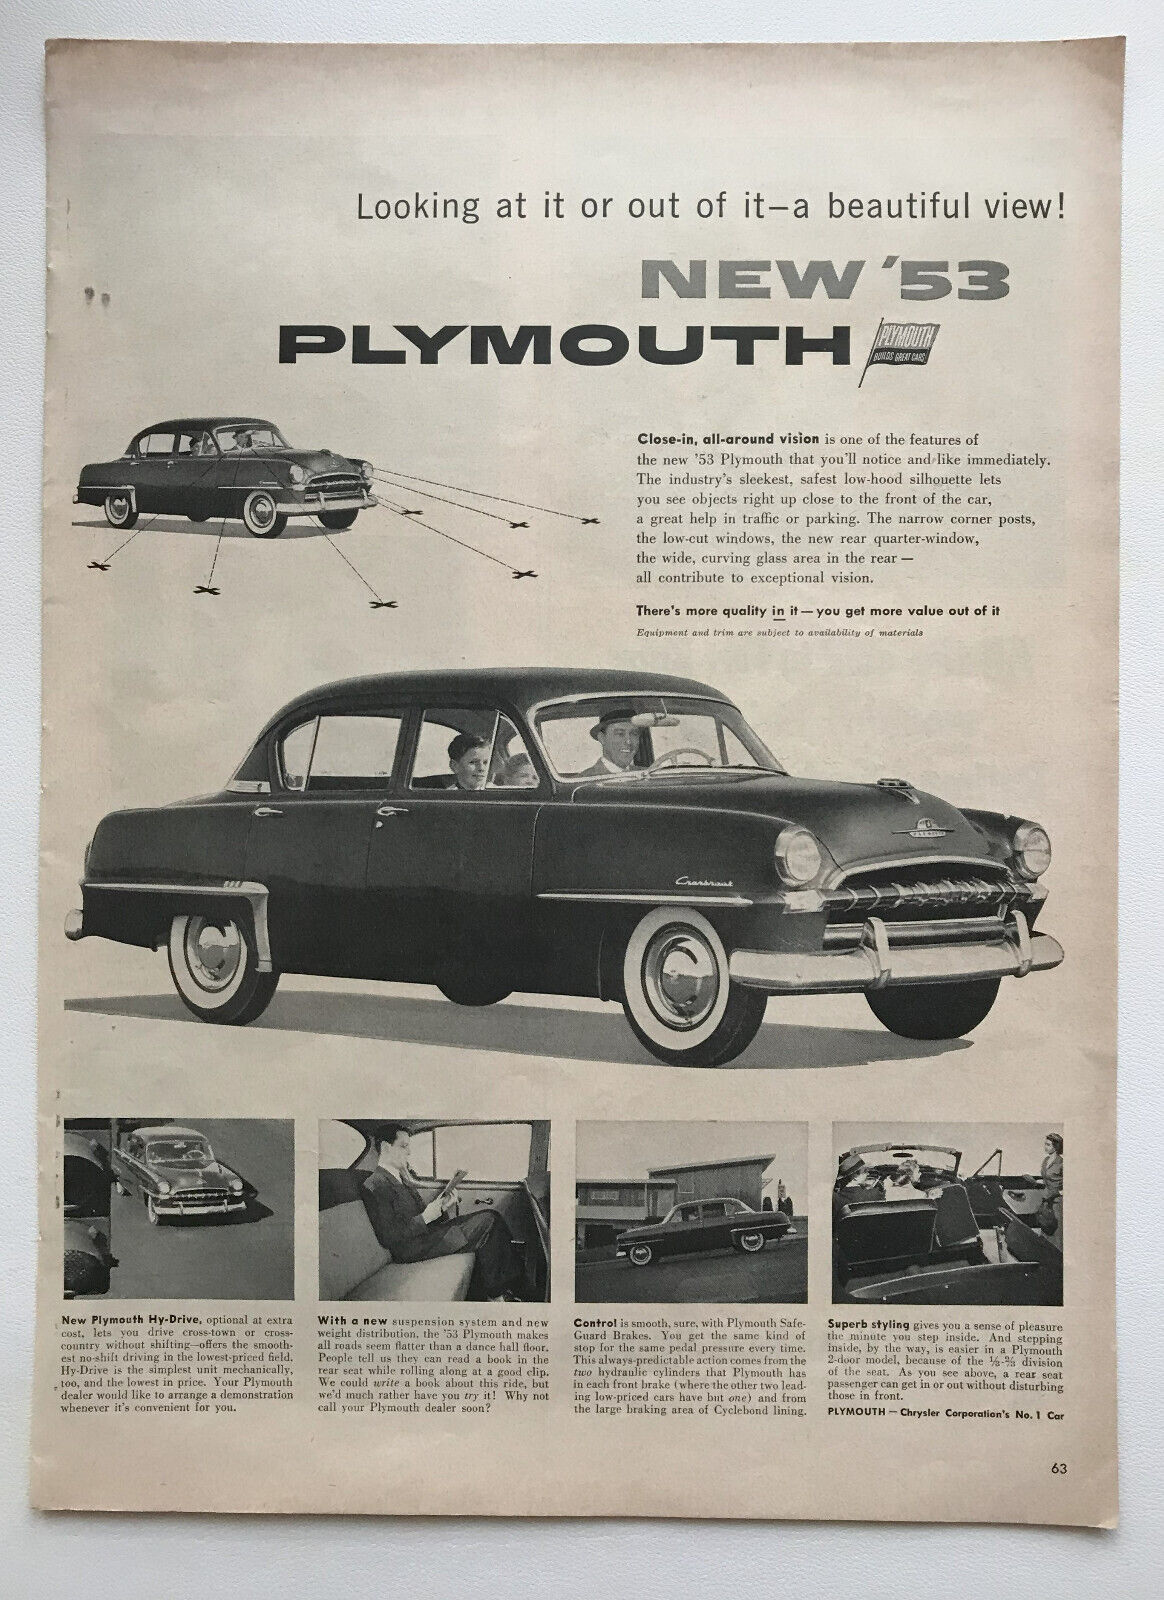 1953 Plymouth Hy-Drive, Association Of American Railroads Vintage Print Ads